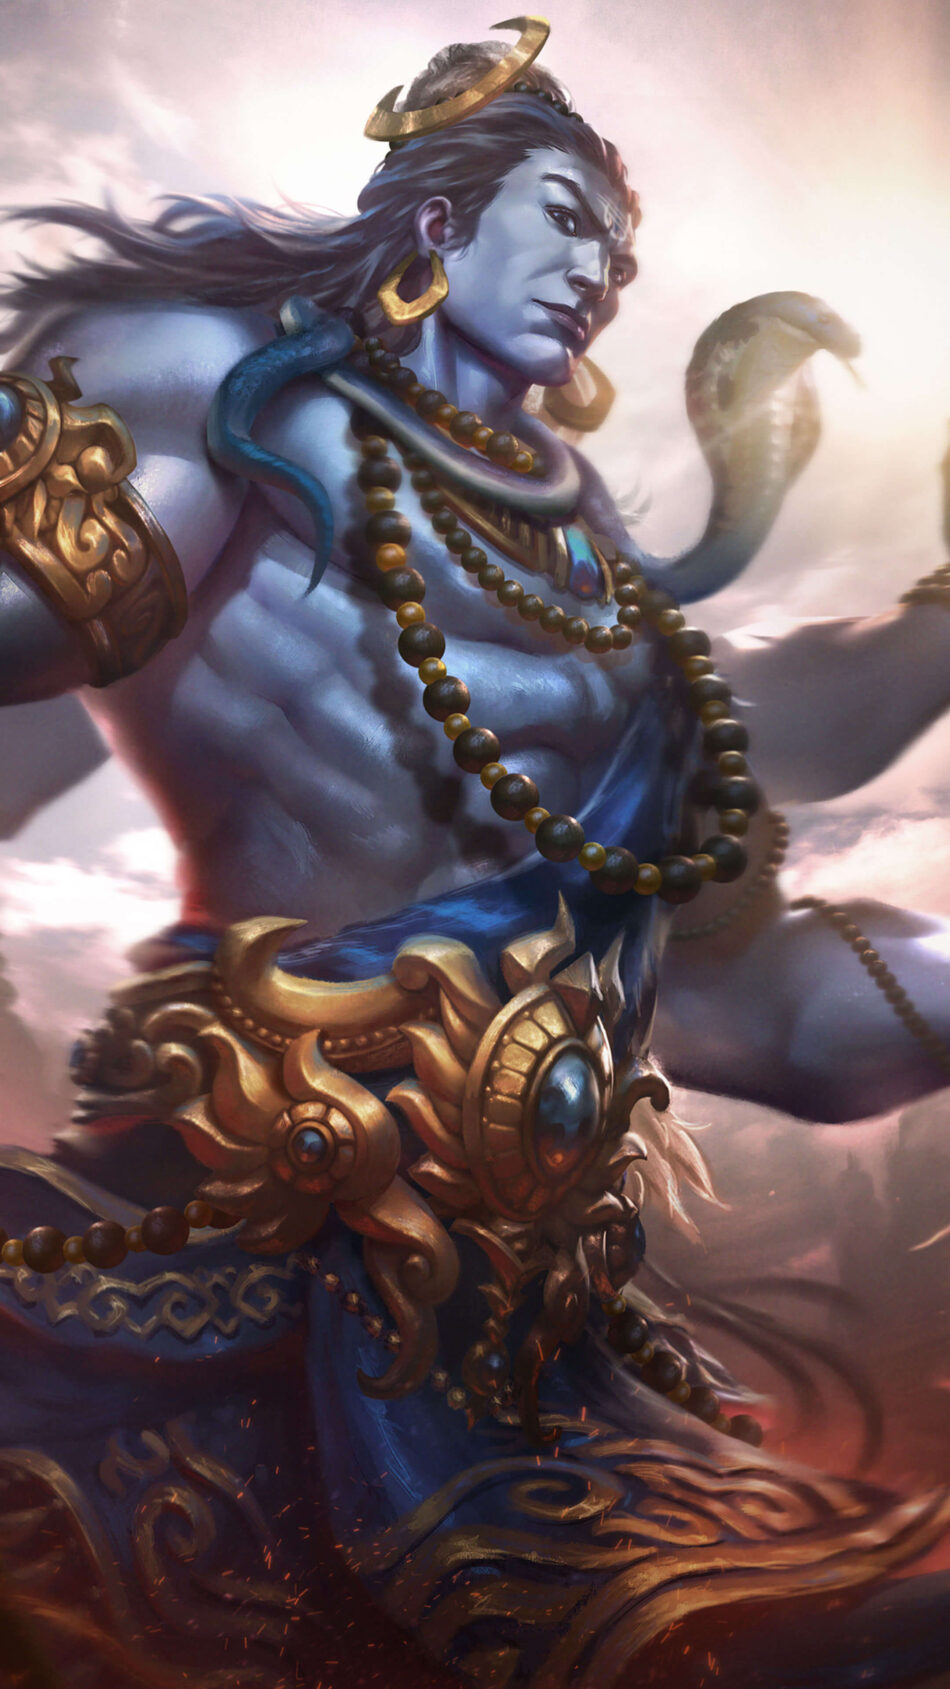 Lord Shiva The Destroyer Smite Game Poster 4K Ultra HD Mobile Wallpaper